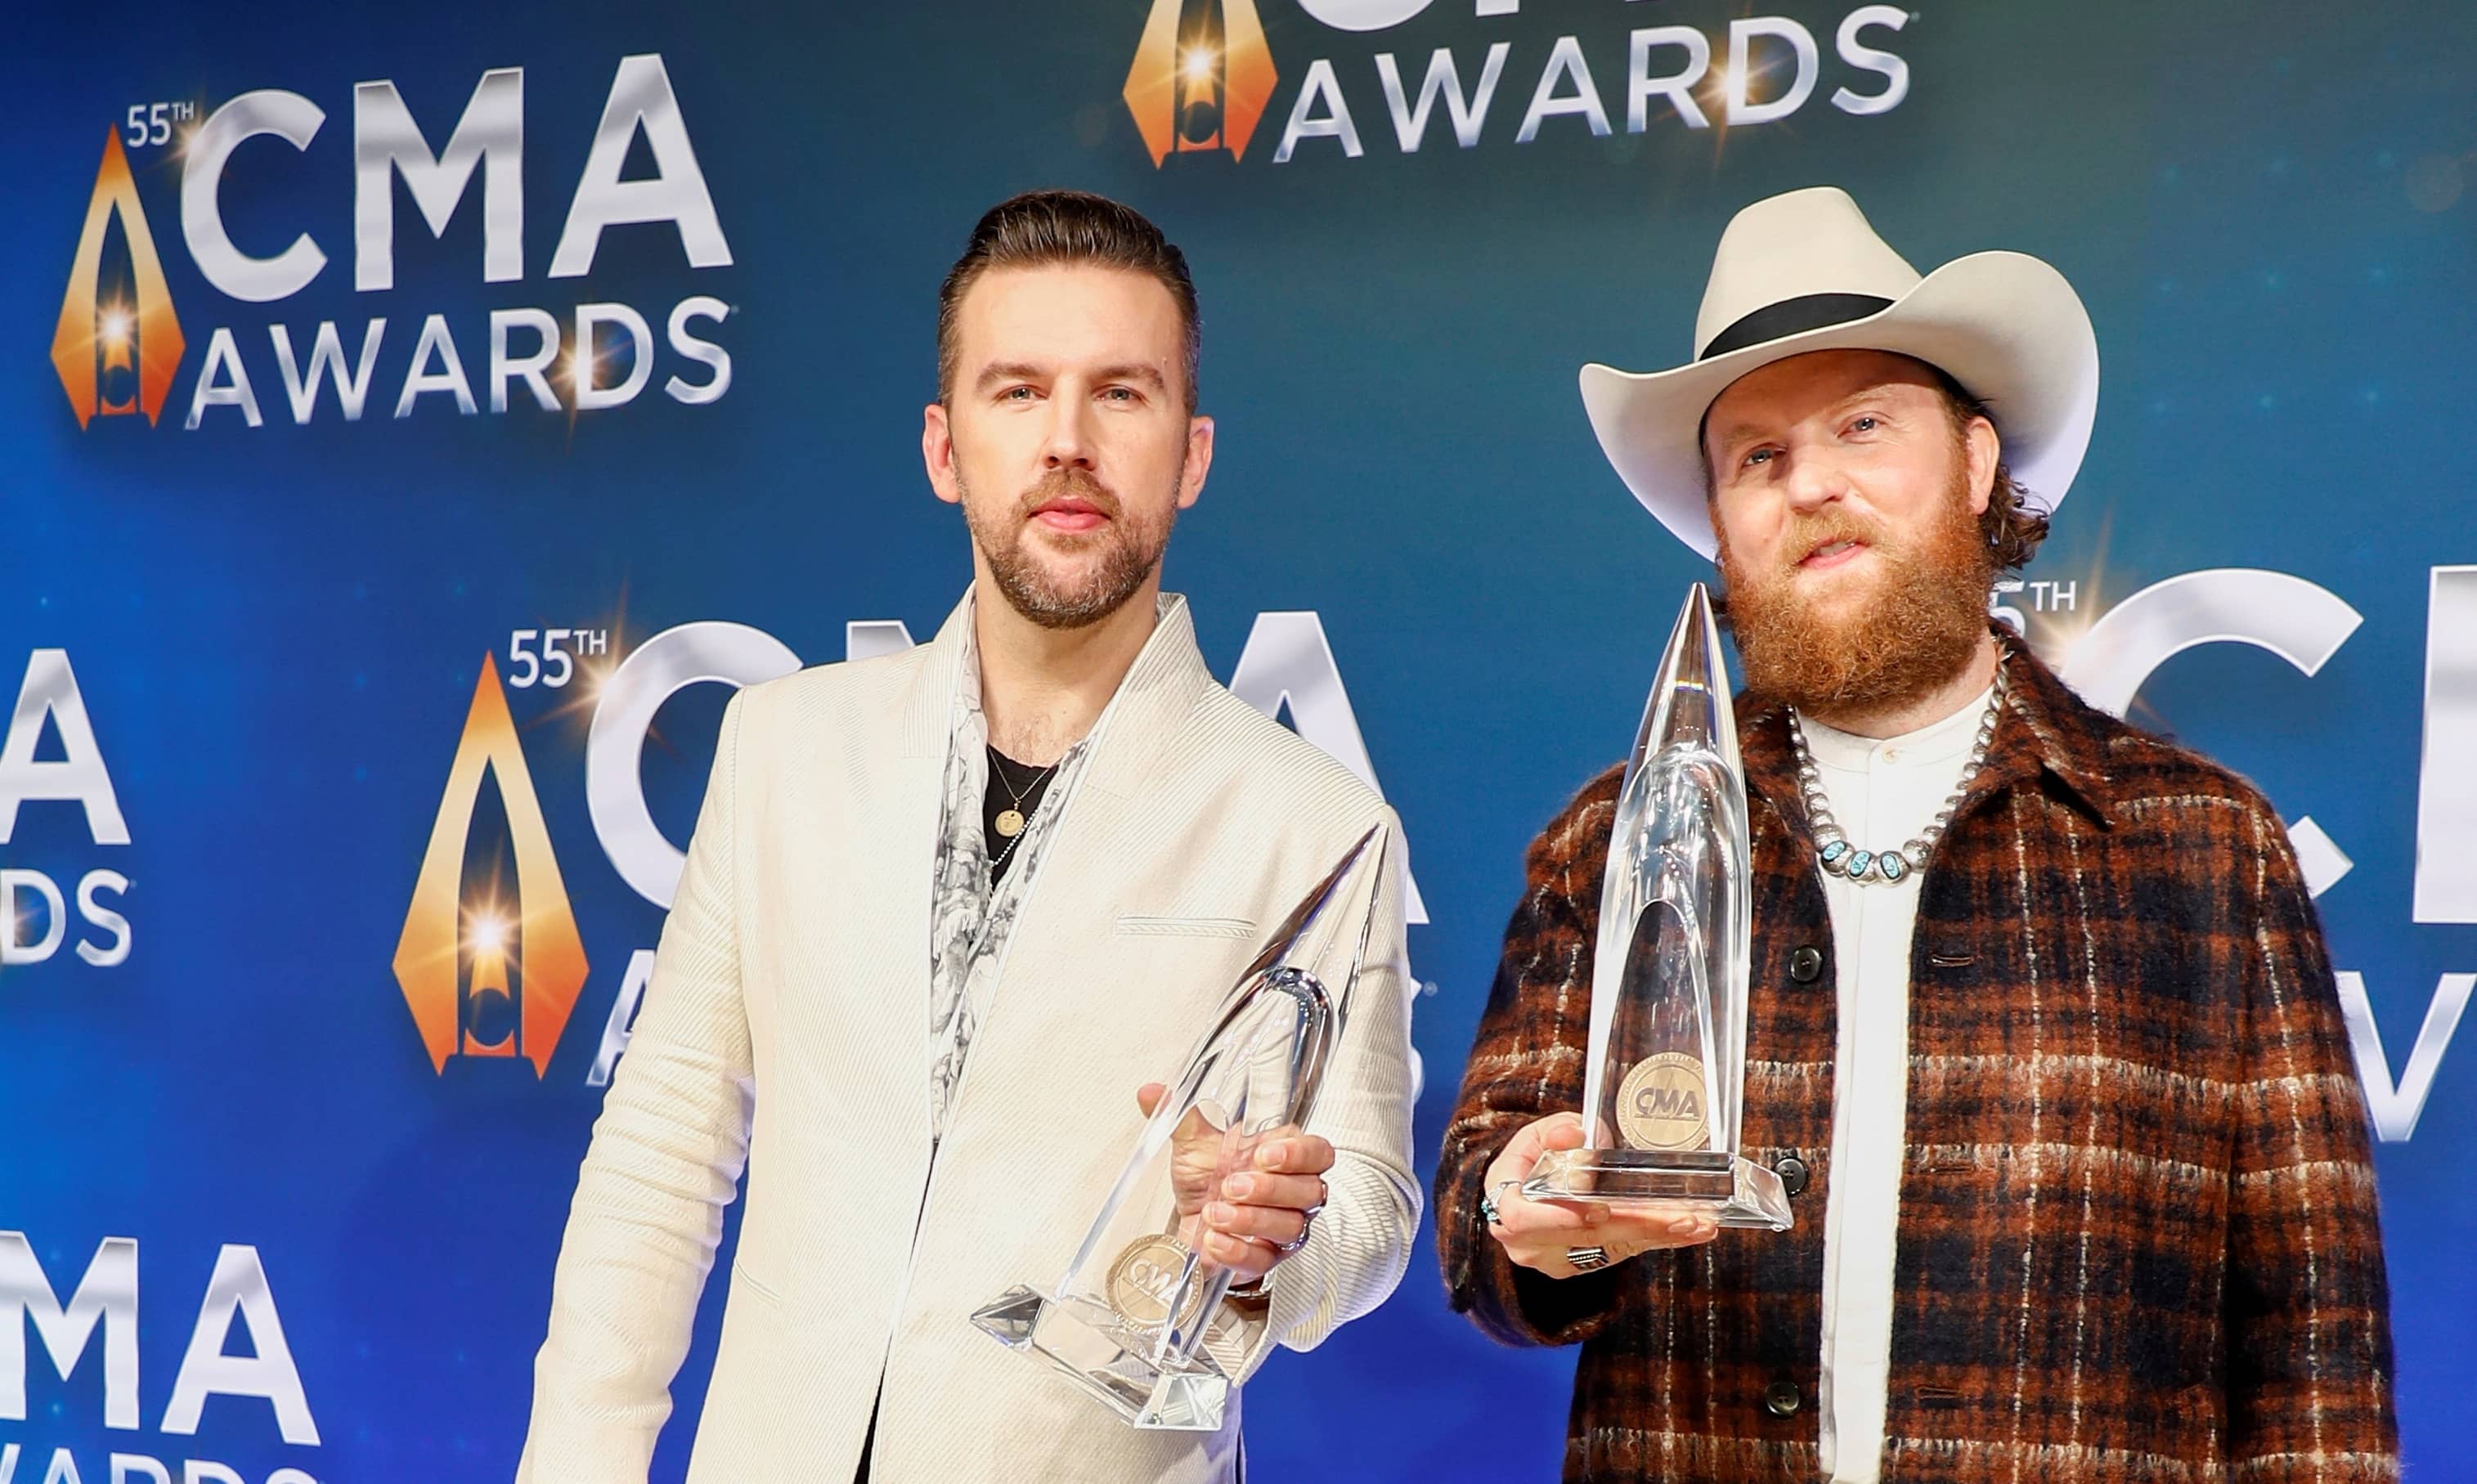 55th-annual-country-music-association-cma-awards-in-nashville-4